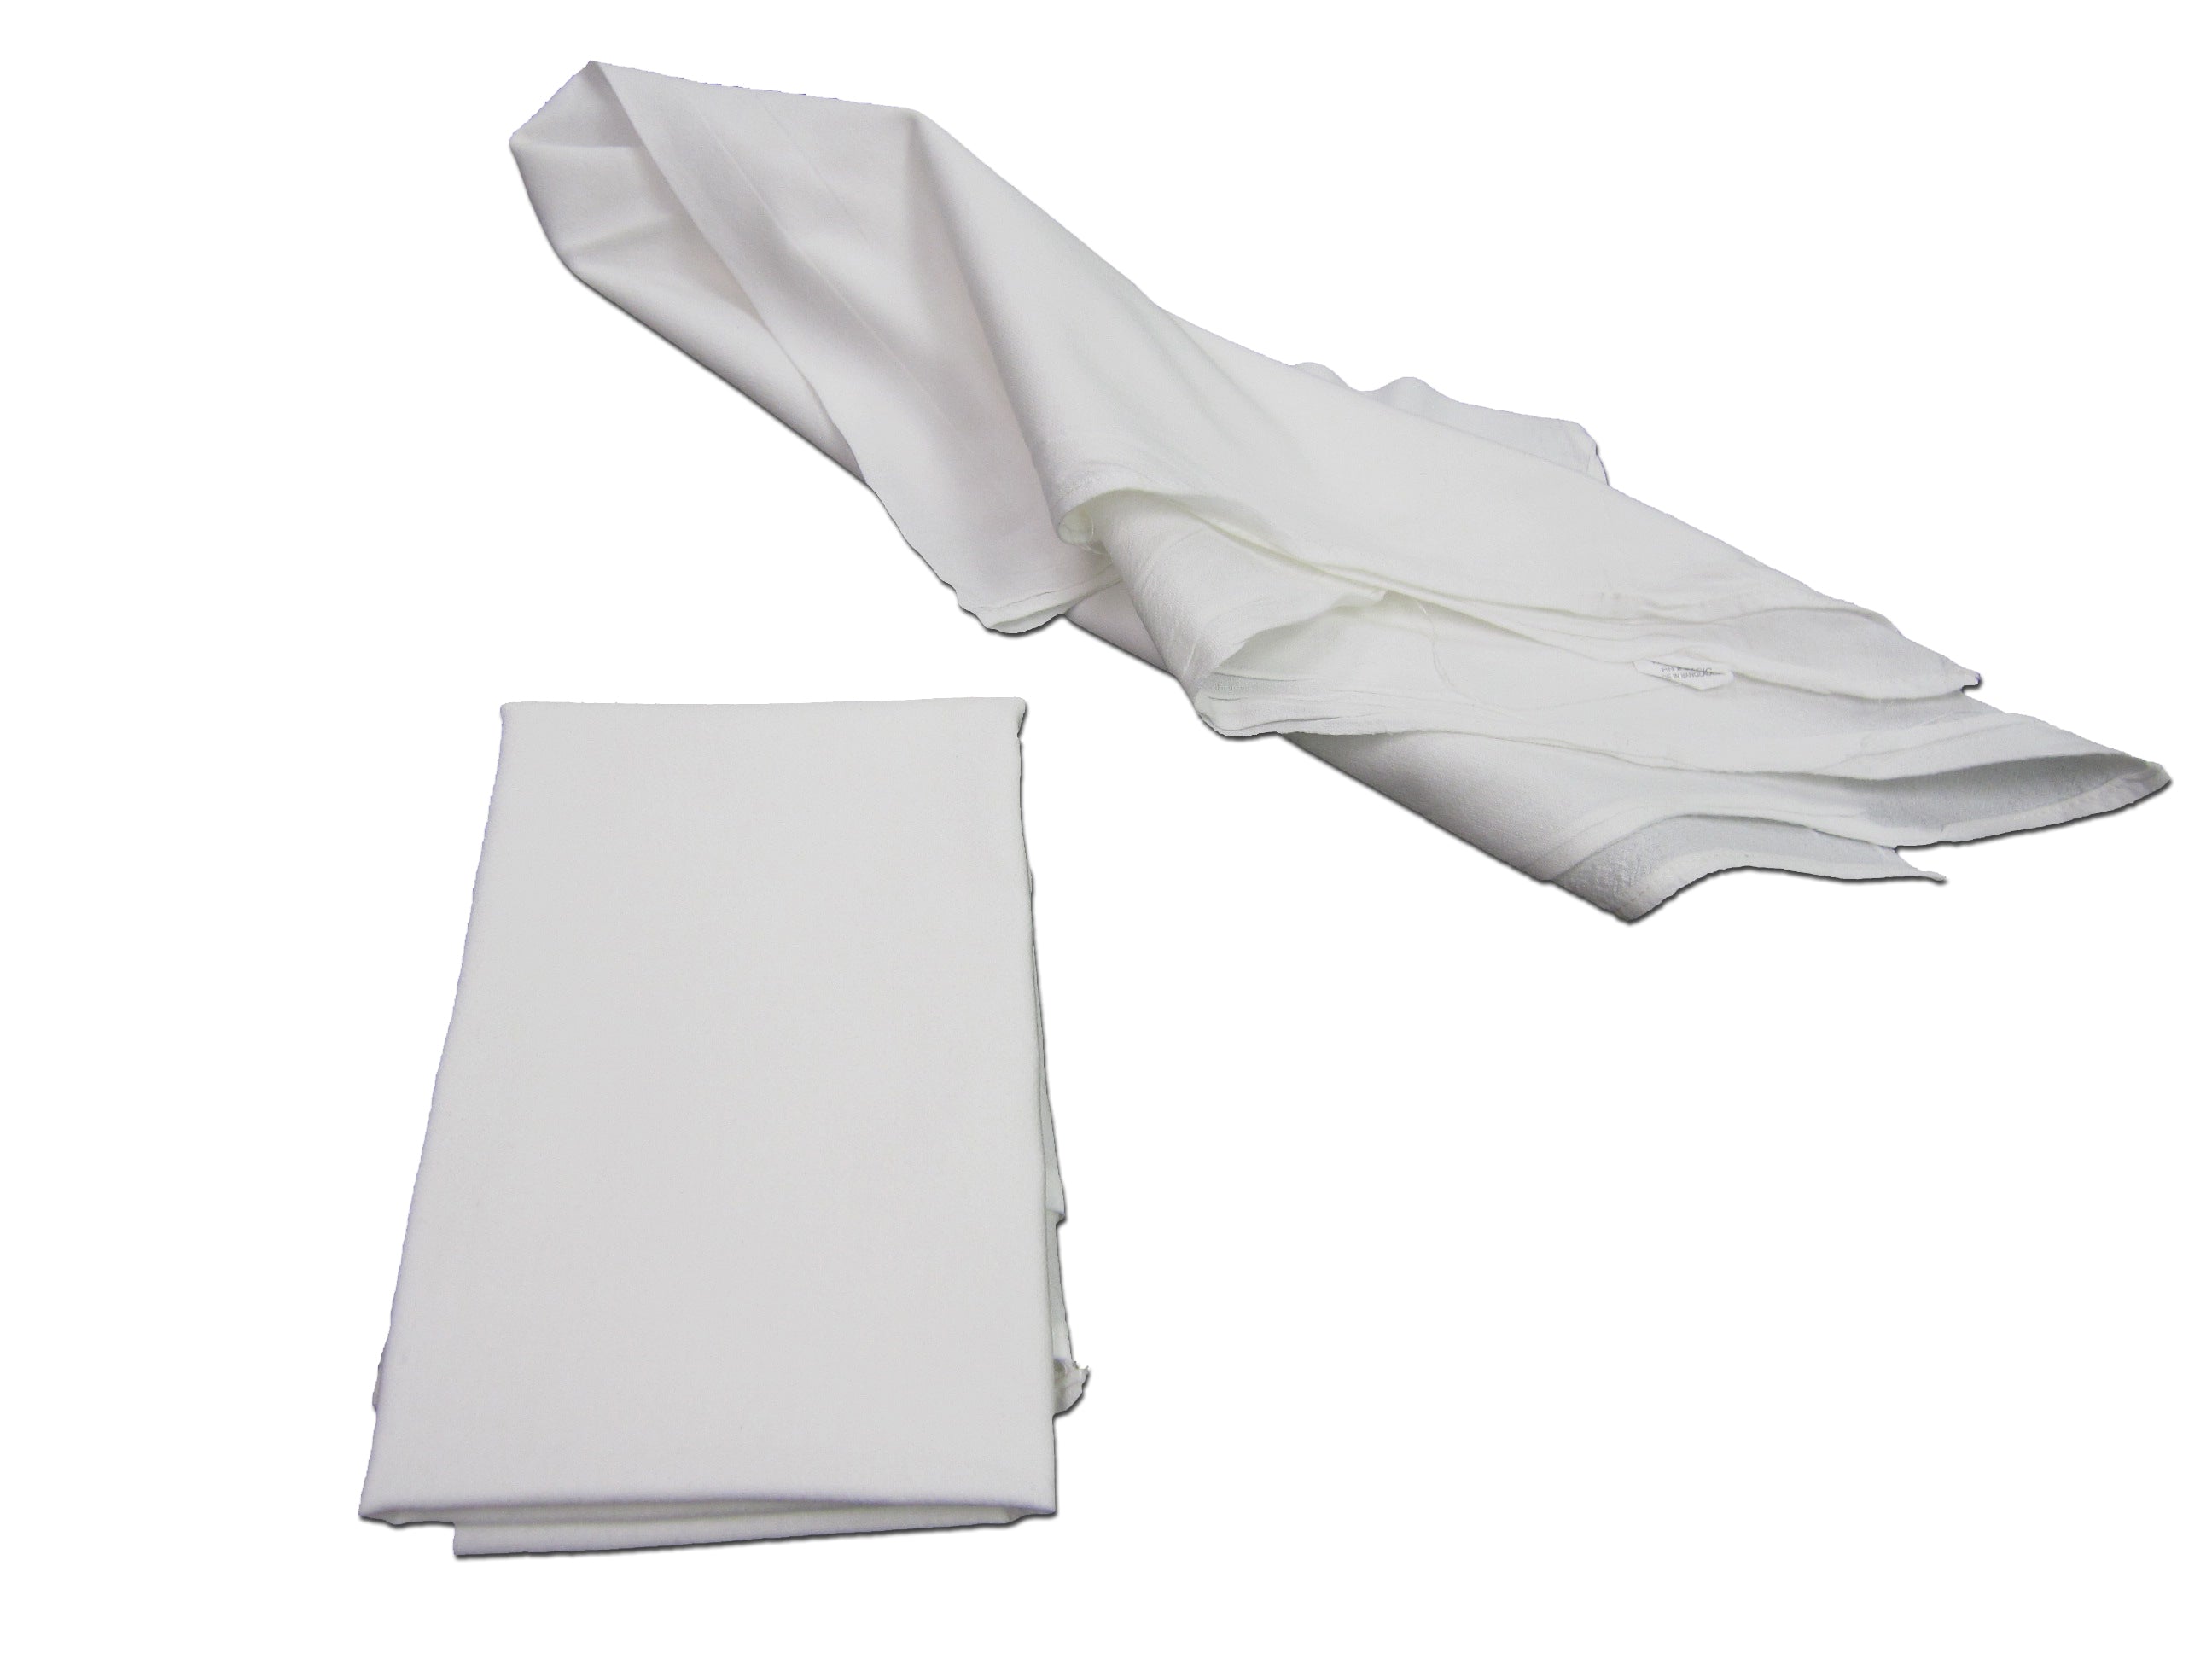 Pro-Clean Basics: Sanitized Anti-Bacterial White Wiping Towel, 28in x 29in